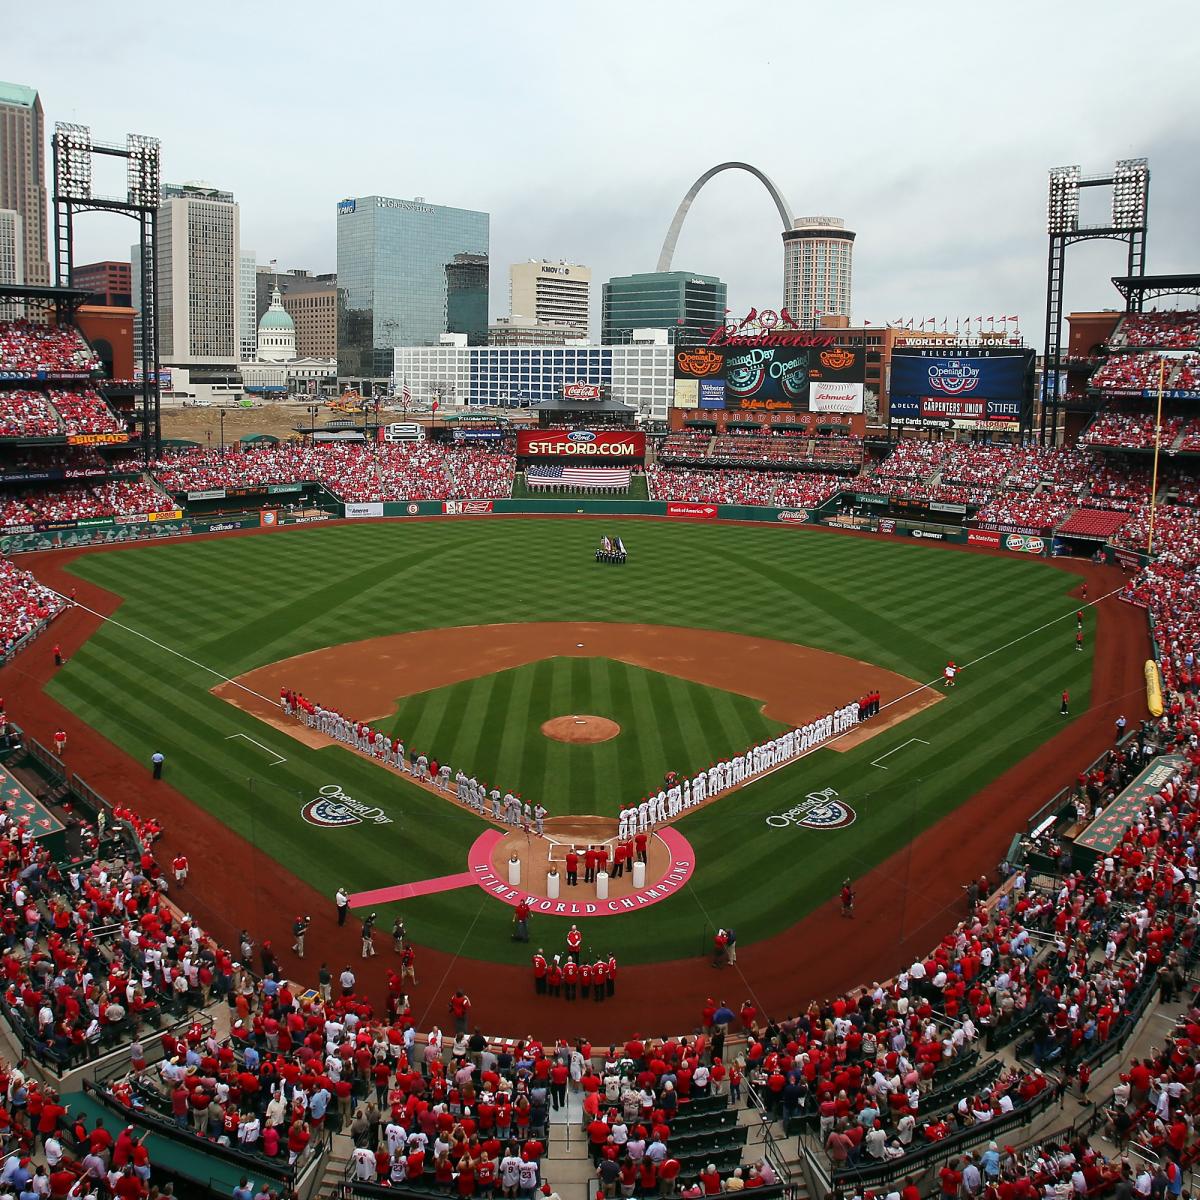 Busch Stadium to Host College Football Game on September 21